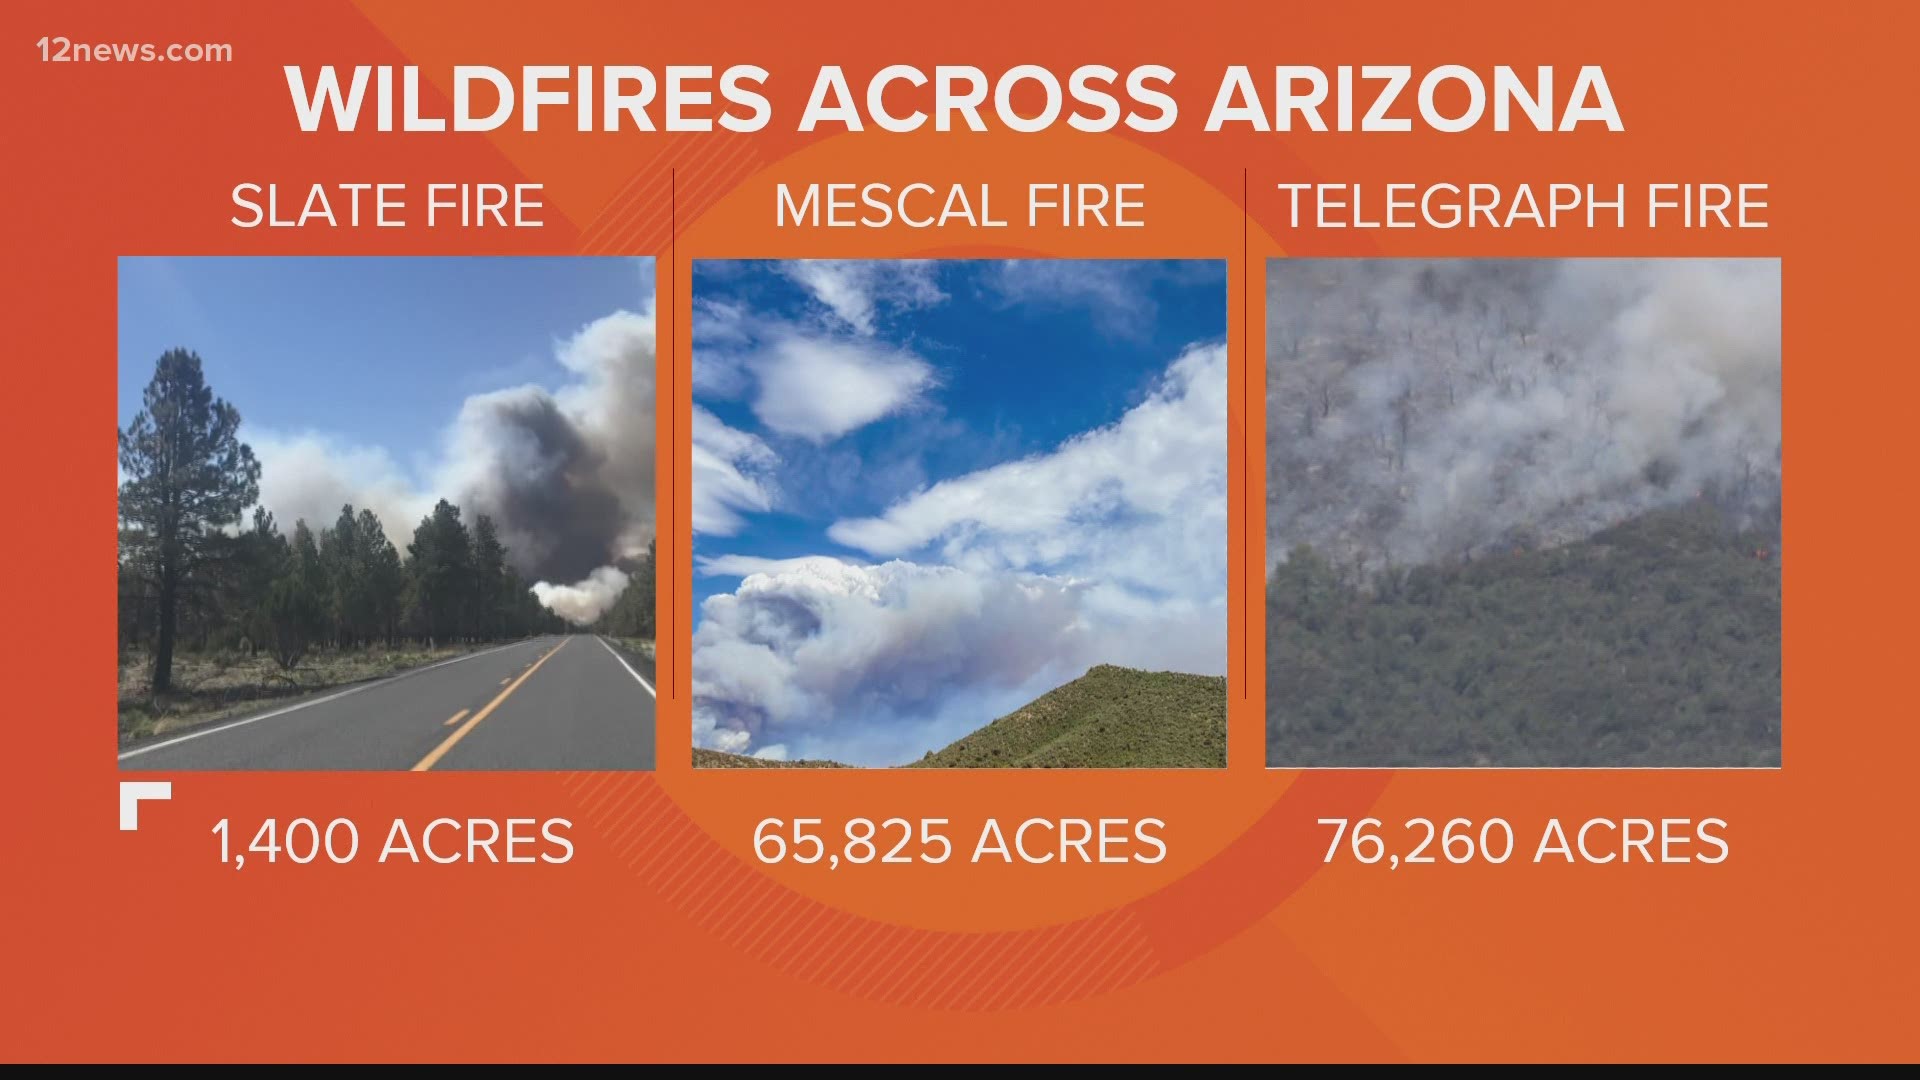 Here's the latest update on firefighting efforts on the current wildfires burning in Arizona on June 9, 2021.